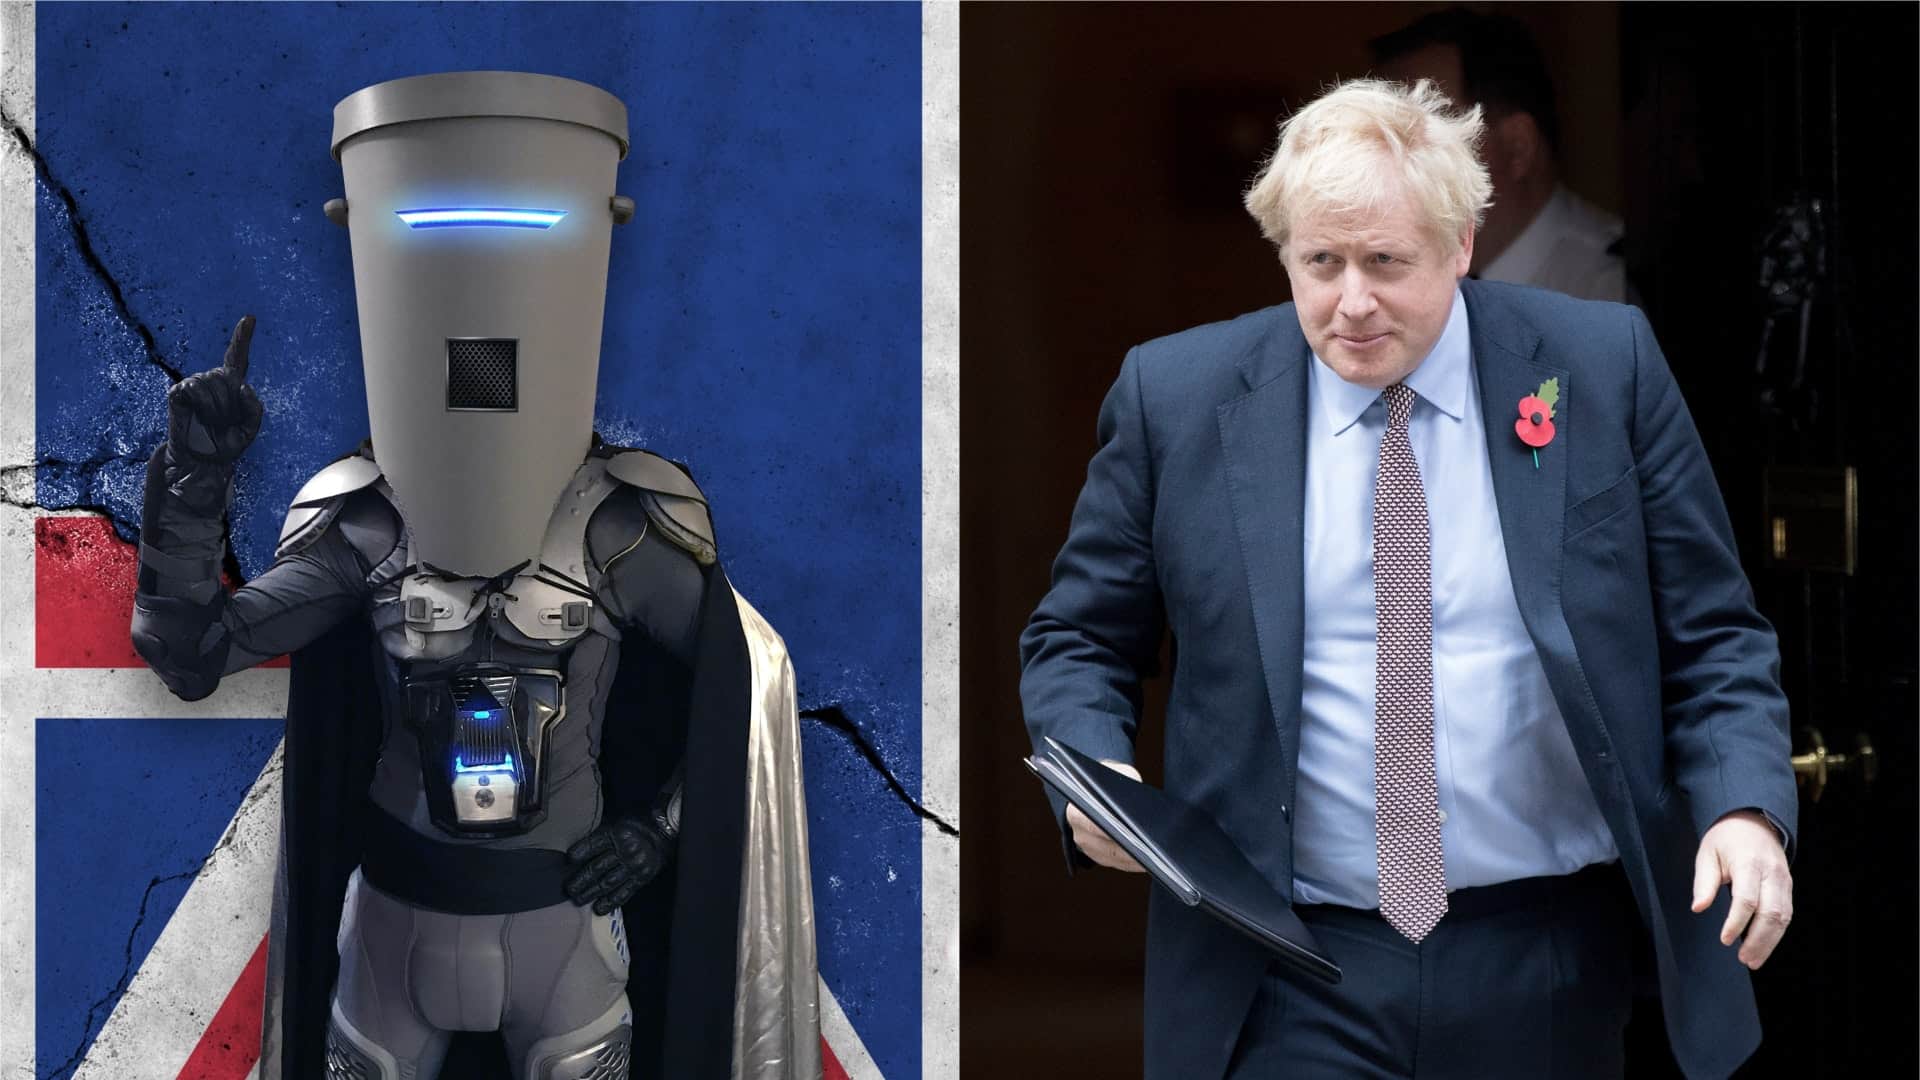 Lord Buckethead changes his name and announces plans to run against Boris in elections